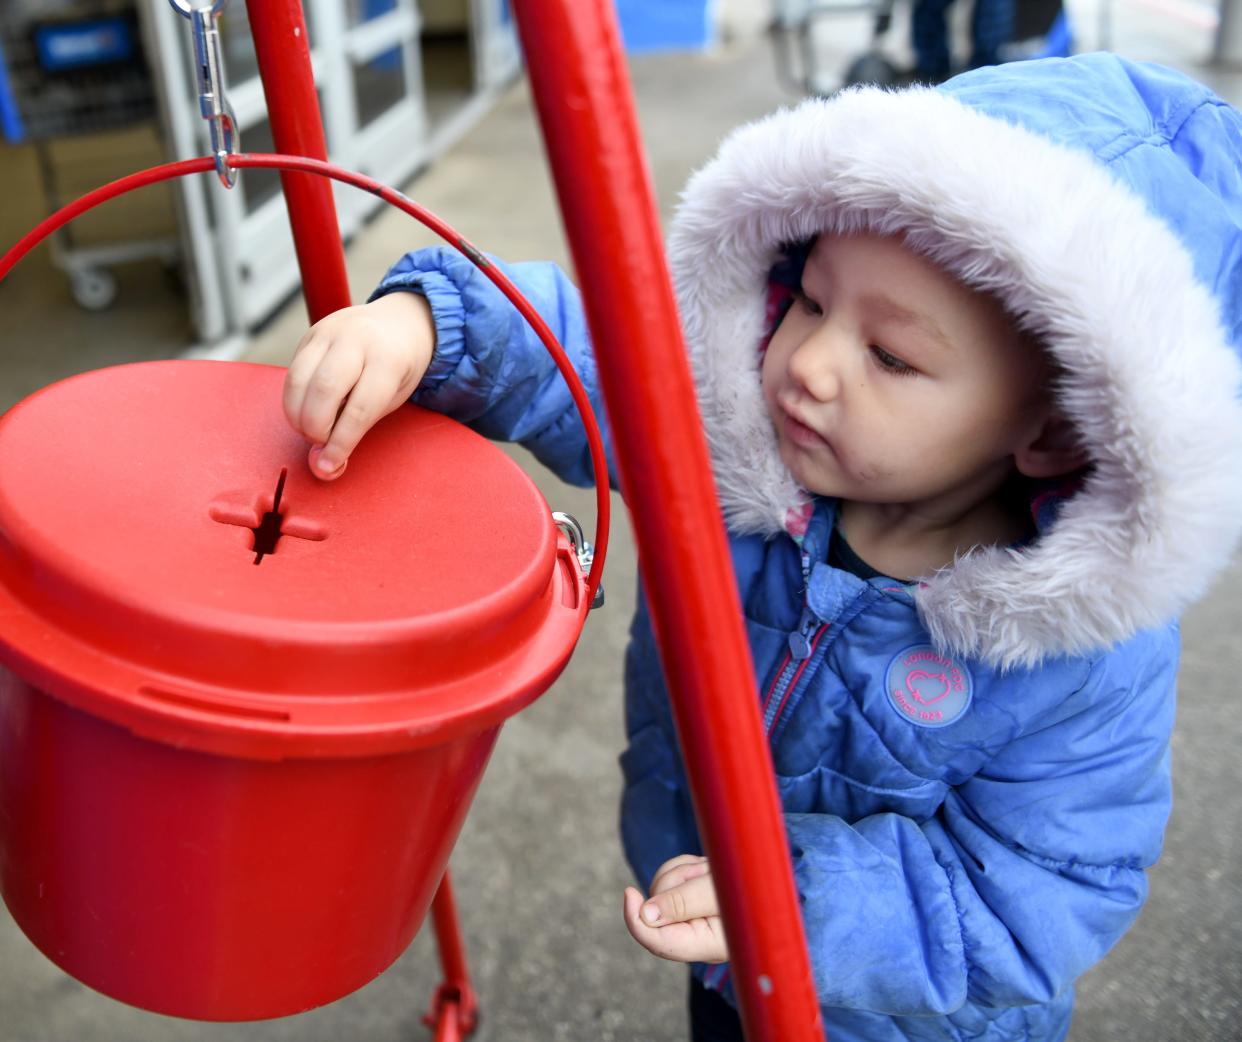 Ka'Myah Todd drops change into a Salvation Army kettle on Wednesday at the Walmart store on Atlantic Boulevard in Canton while out with her mother, Tiffany Todd of Canton.